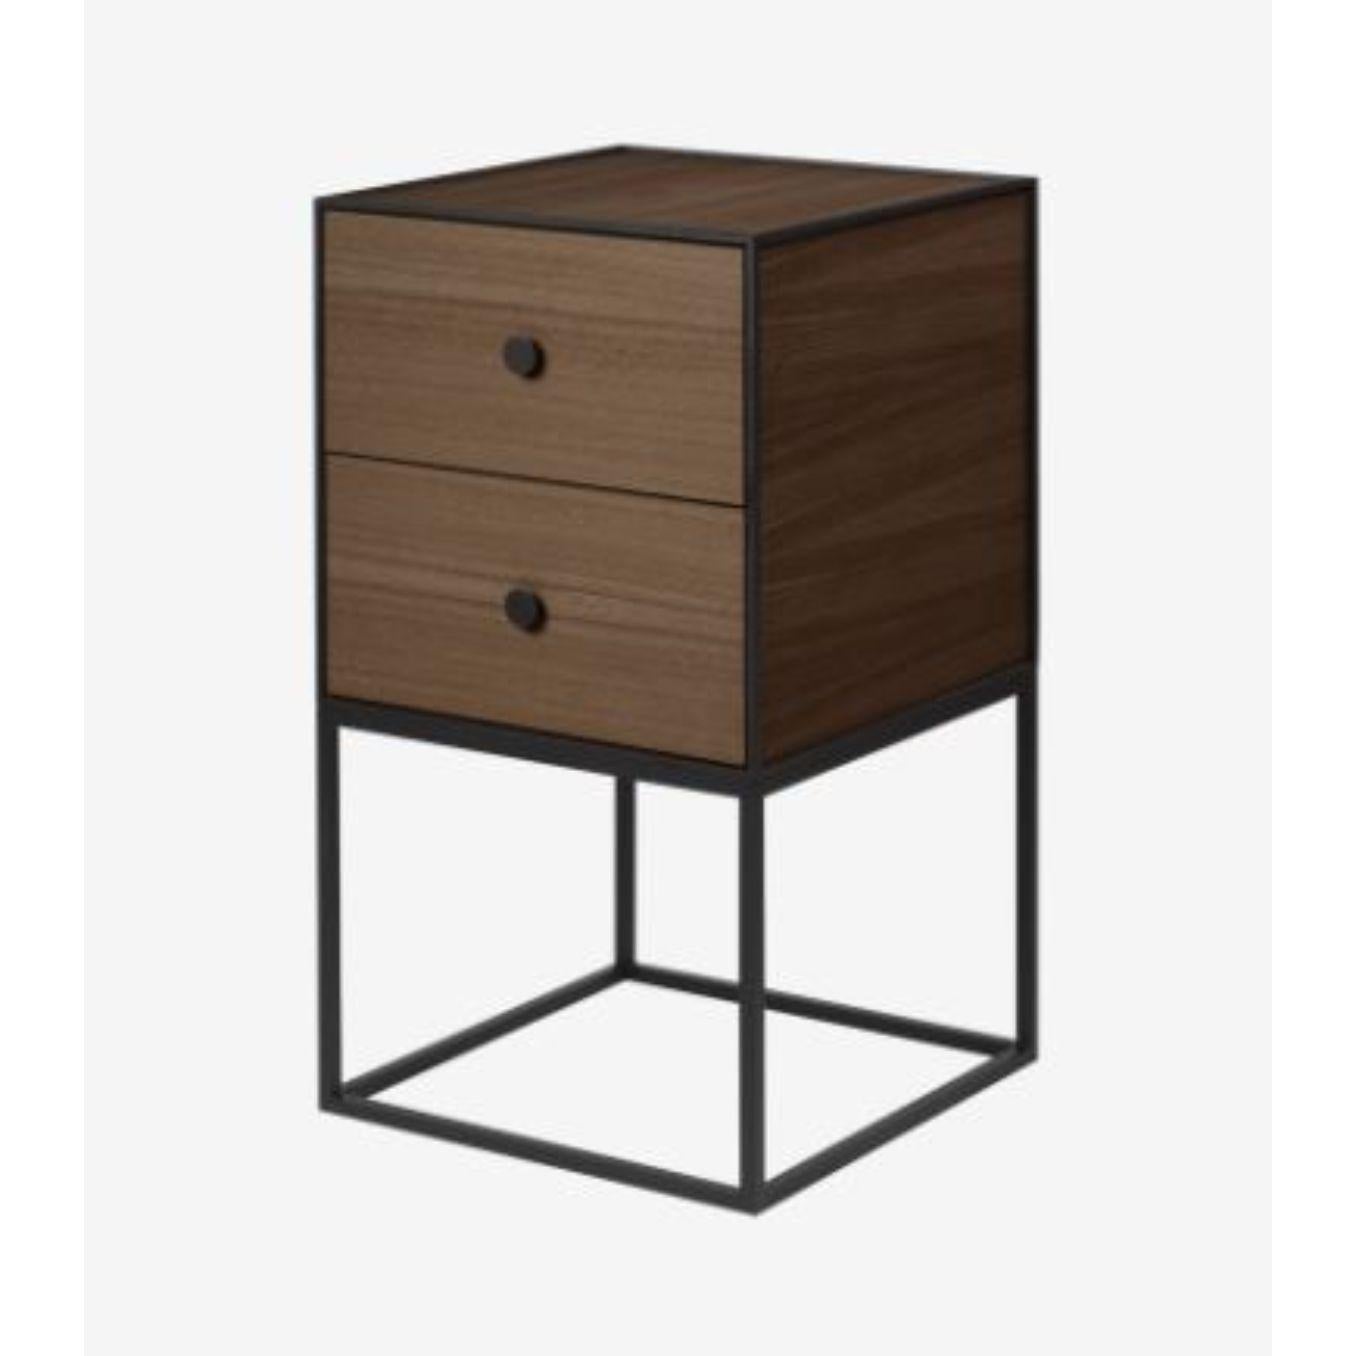 35 smoked oak frame sideboard with 2 drawers by Lassen
Dimensions: D 35 x W 35 x H 63 cm 
Materials: Finér, Melamin, Melamine, Metal, Veneer, Oak
Also available in different colors and dimensions. 
Weight: 15.50 Kg

By Lassen is a Danish